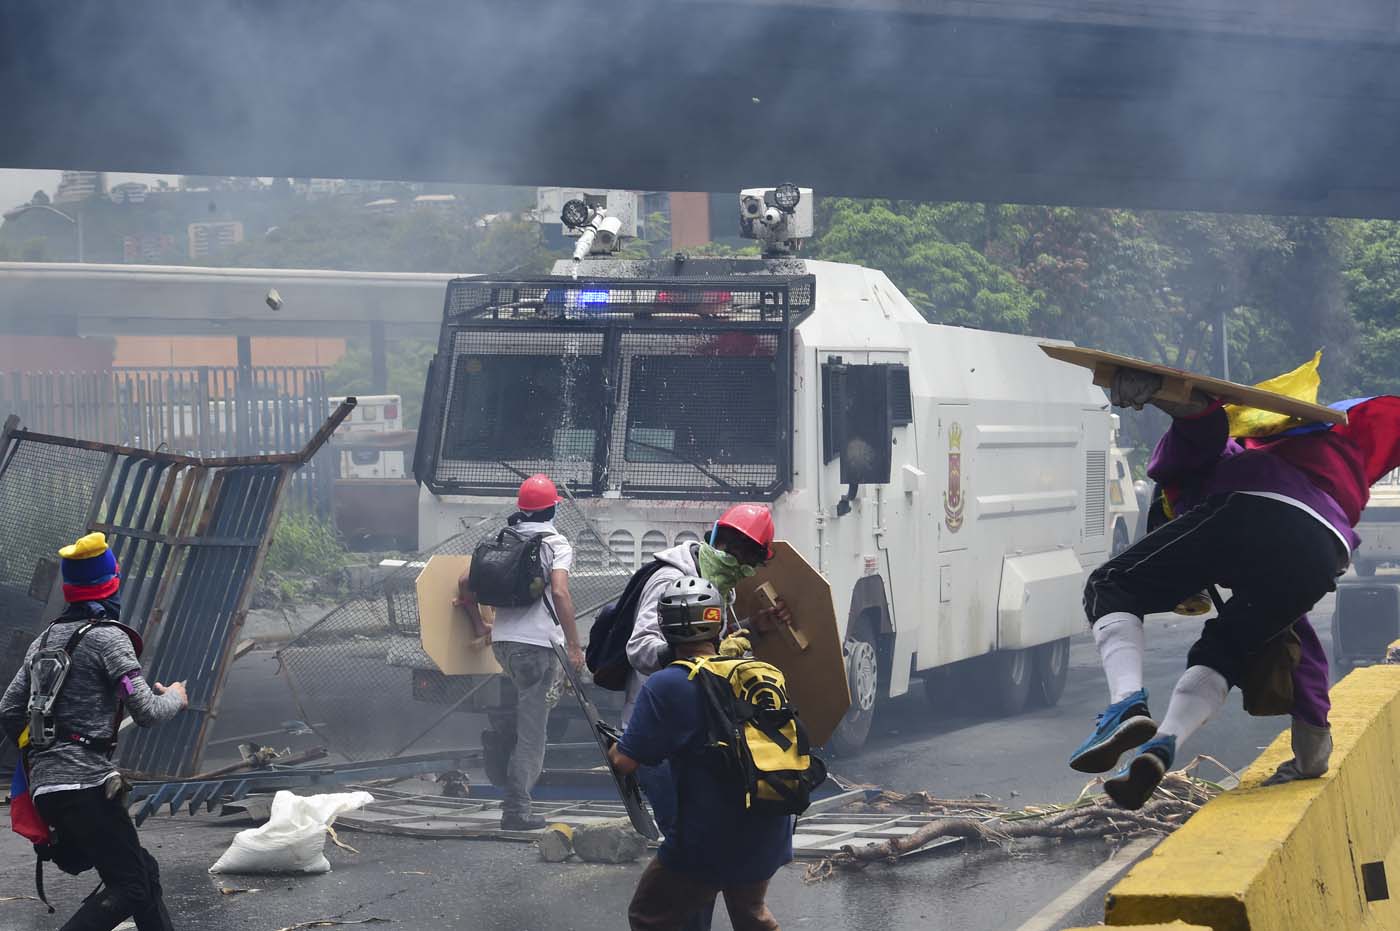 Demonstrators confront a riot police armoured vehicle during clashes within a protest against Venezuelan President Nicolas Maduro, on May 3, 2017. Venezuela's angry opposition rallied Wednesday vowing huge street protests against President Nicolas Maduro's plan to rewrite the constitution and accusing him of dodging elections to cling to power despite deadly unrest. / AFP PHOTO / RONALDO SCHEMIDT